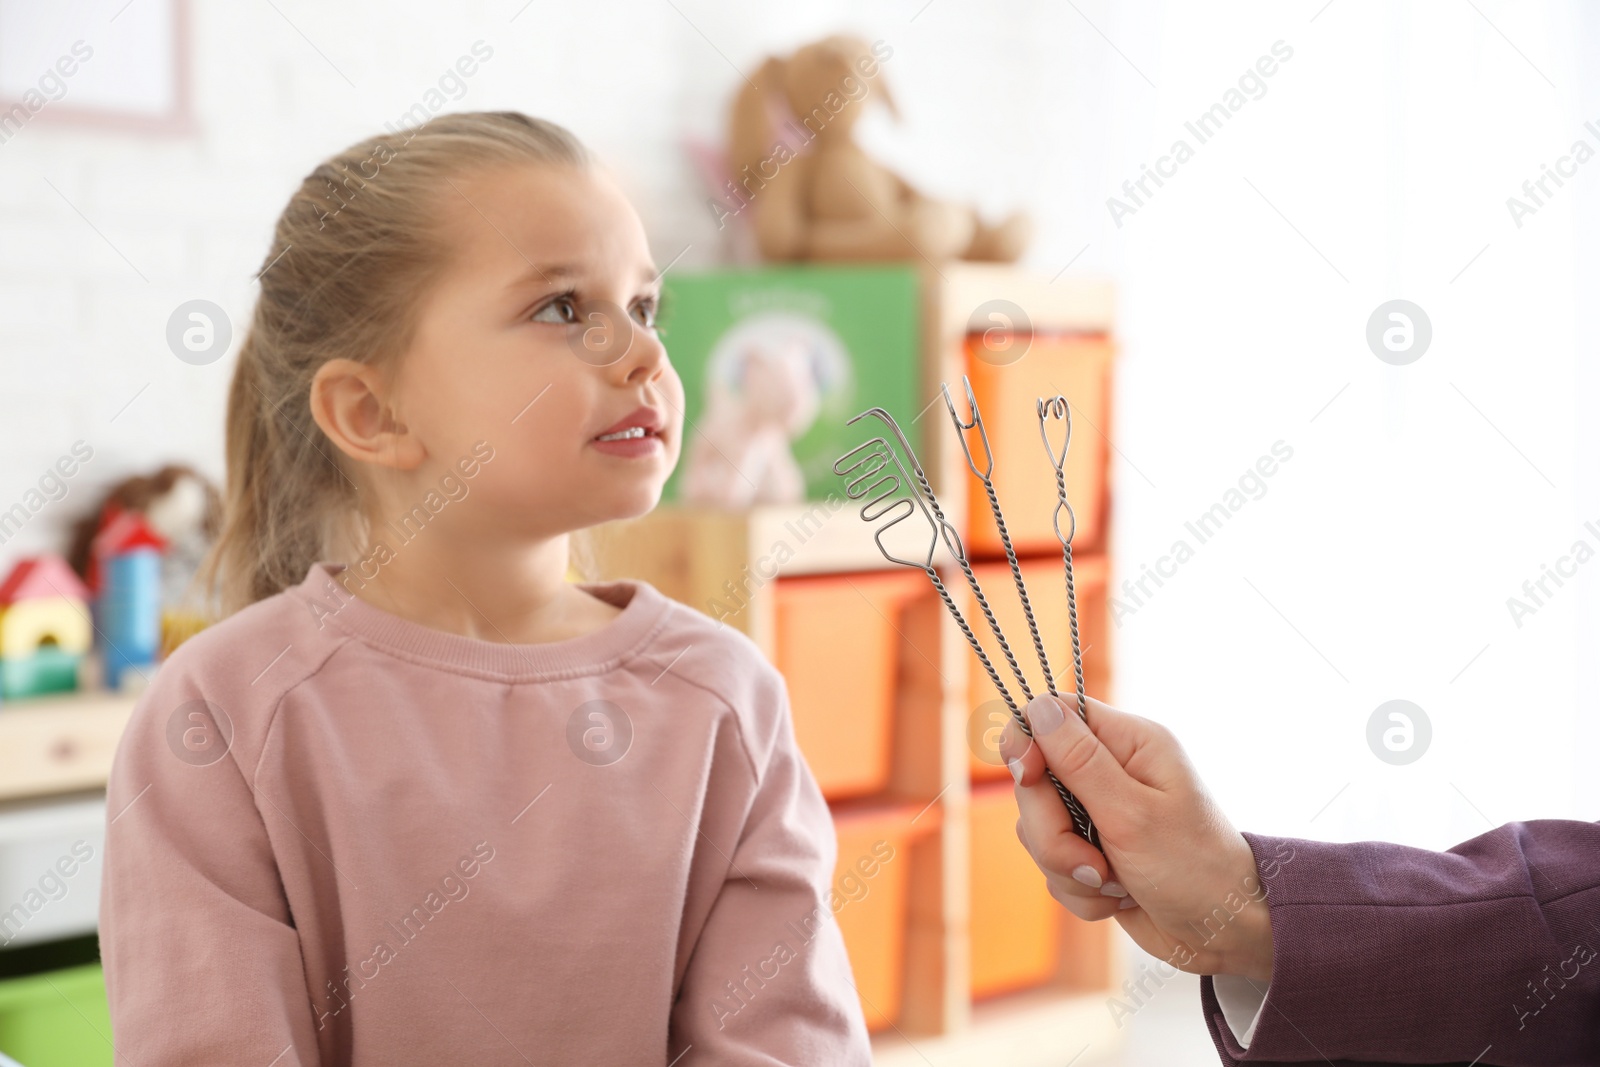 Photo of Speech therapist using logopedic probes on session with little girl in office